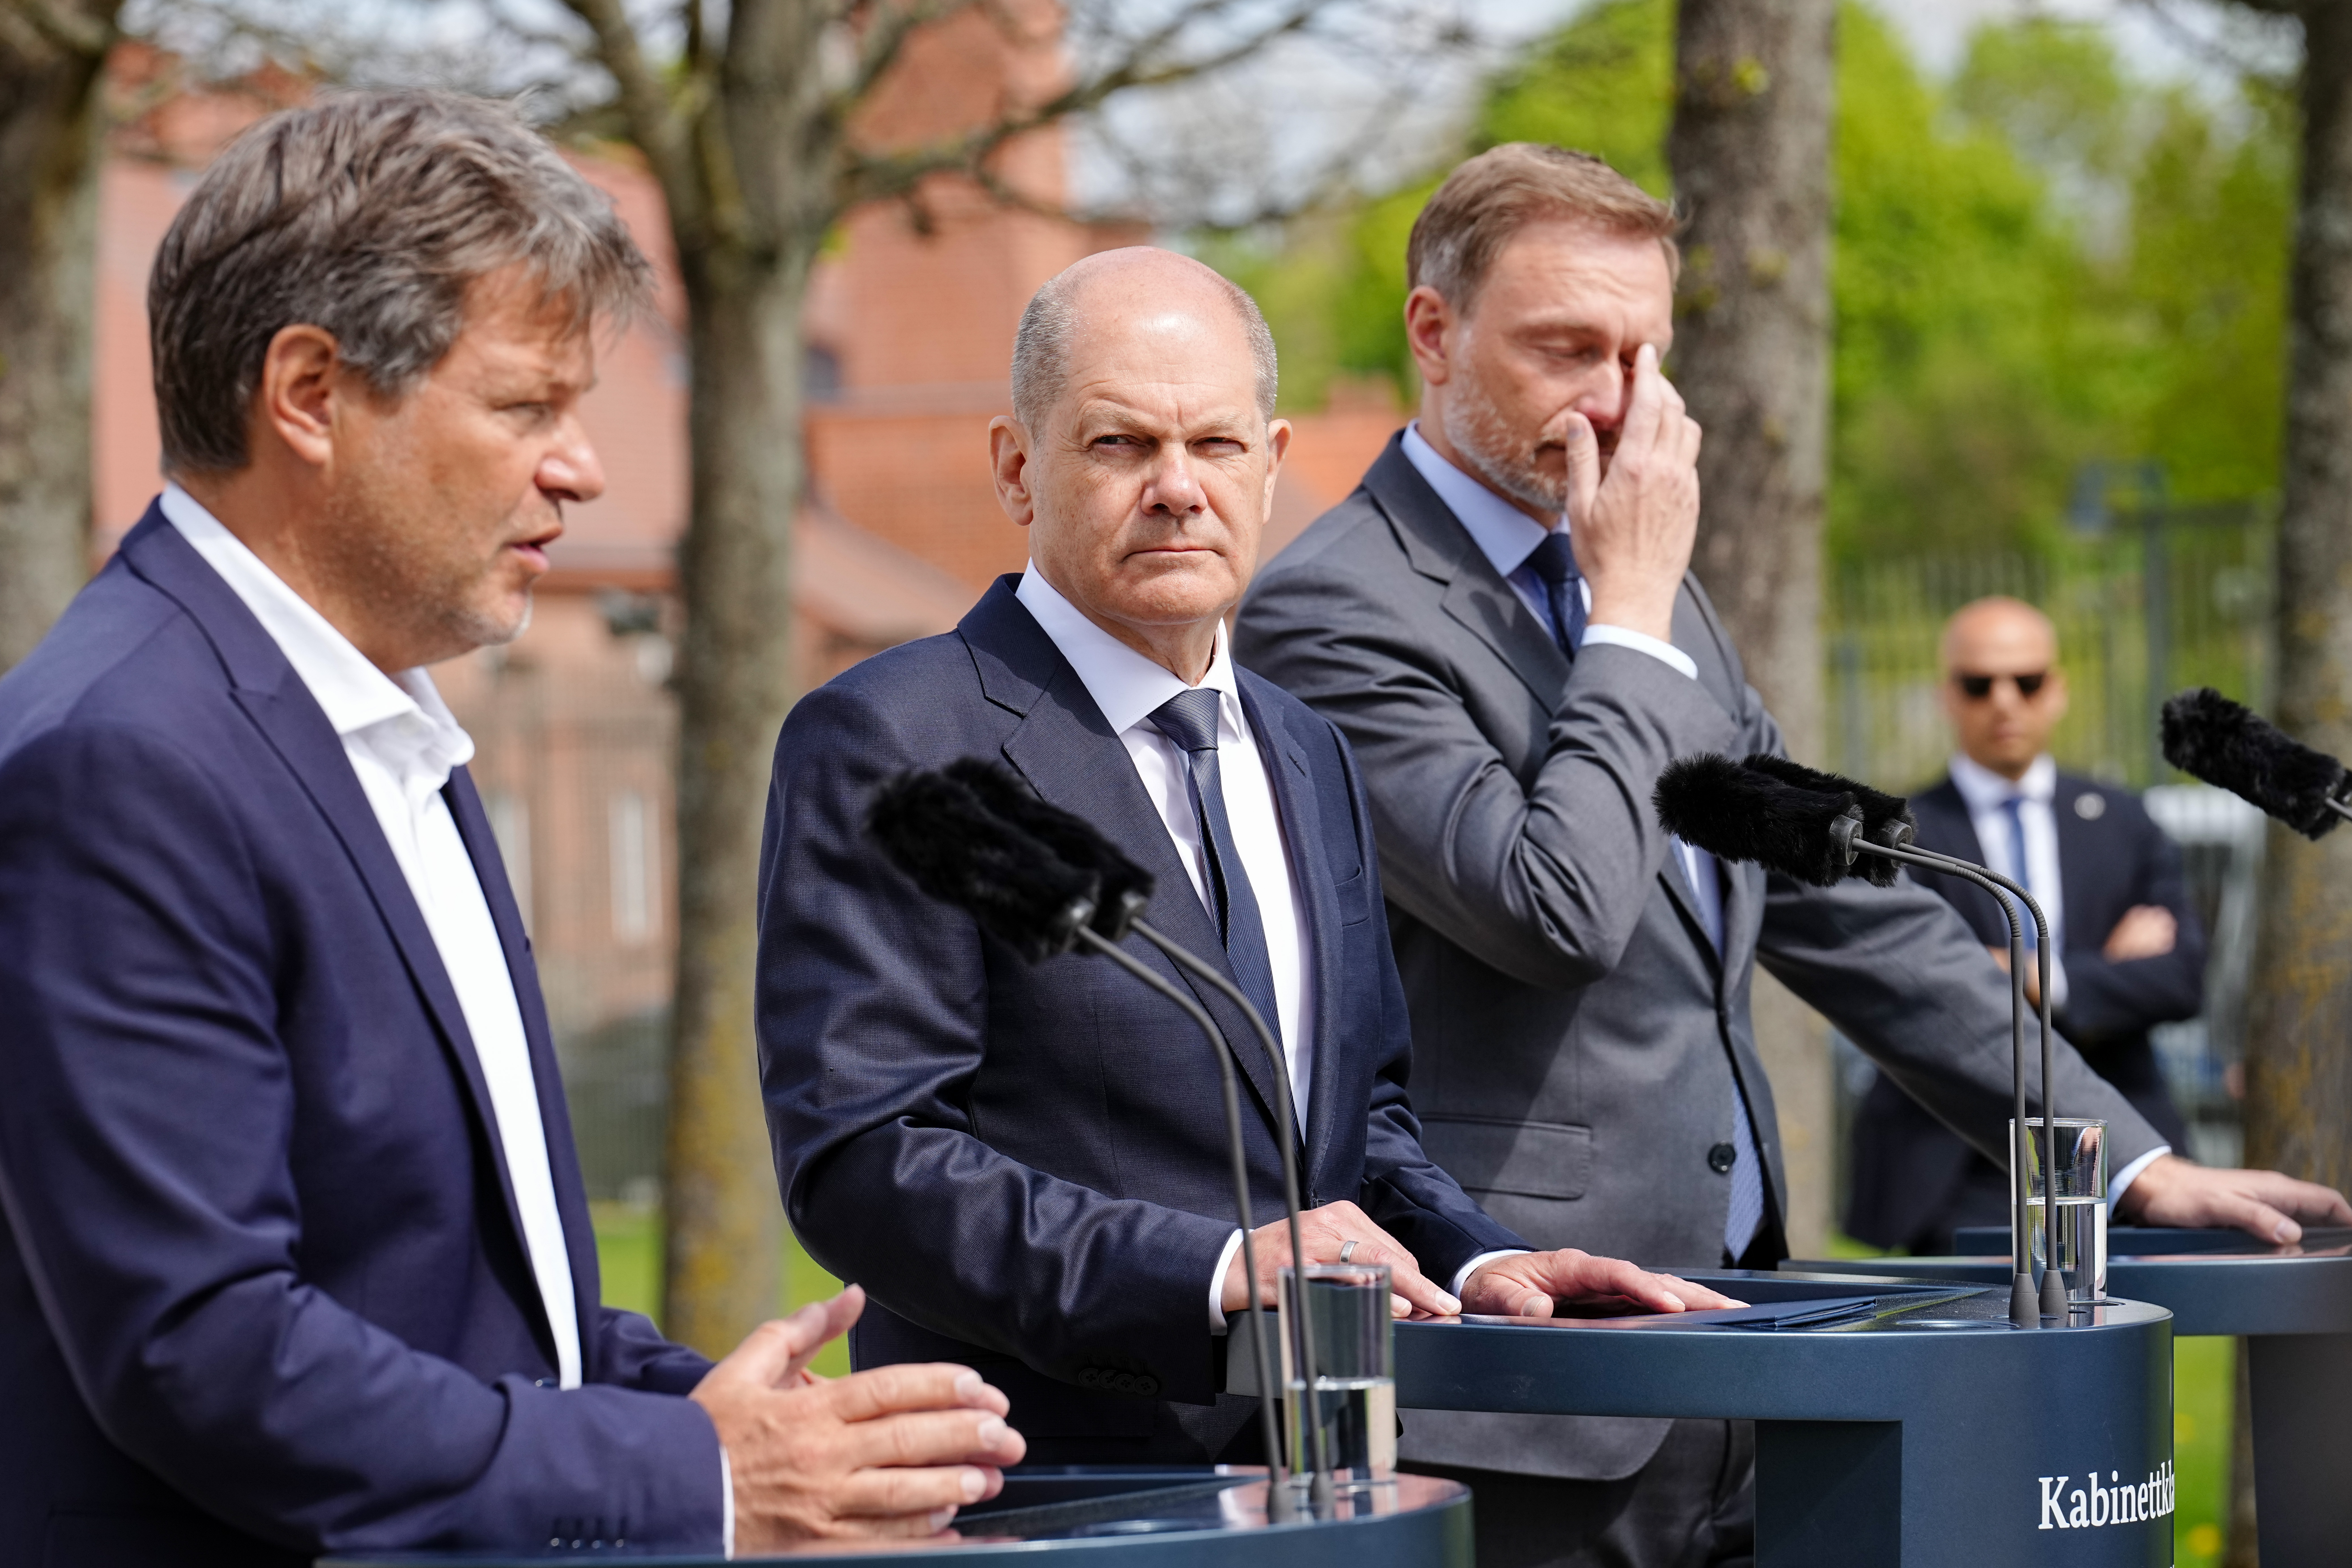 Economic and Climate Minister Robert Habeck, Chancellor Olaf Scholz and Finance Minister Christian Lindner during a press conference earlier in 2022.